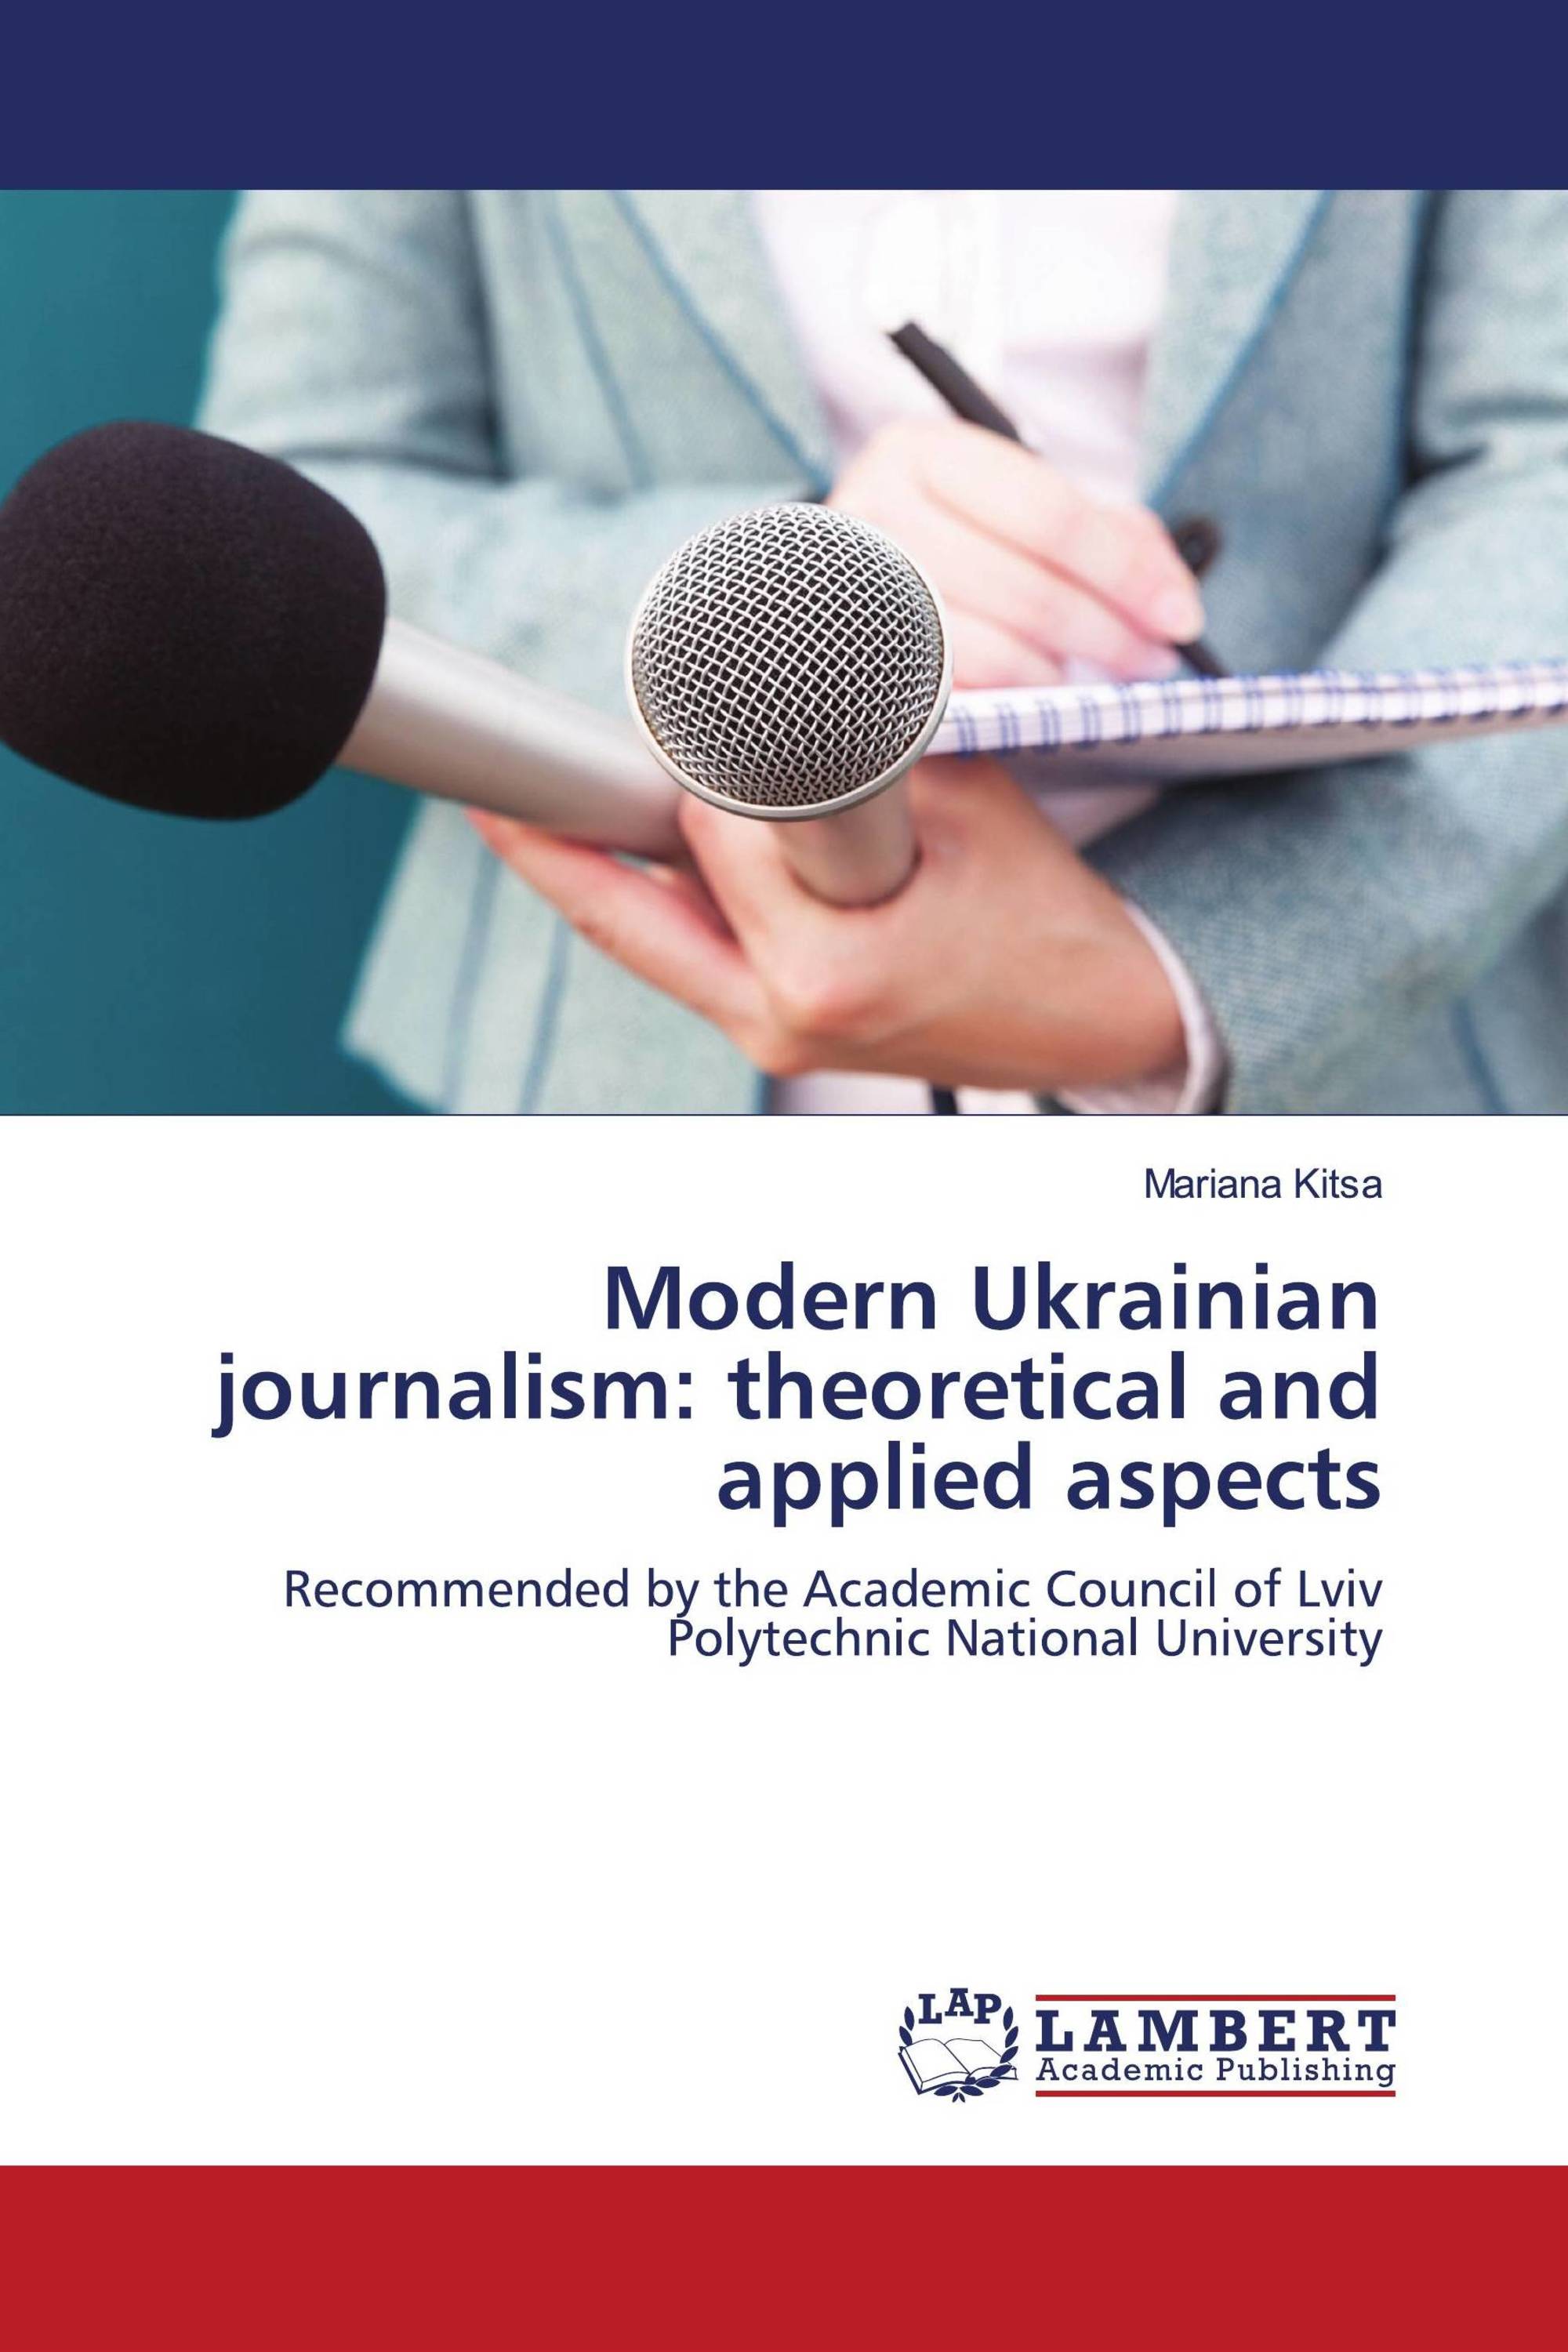 Modern Ukrainian journalism: theoretical and applied aspects